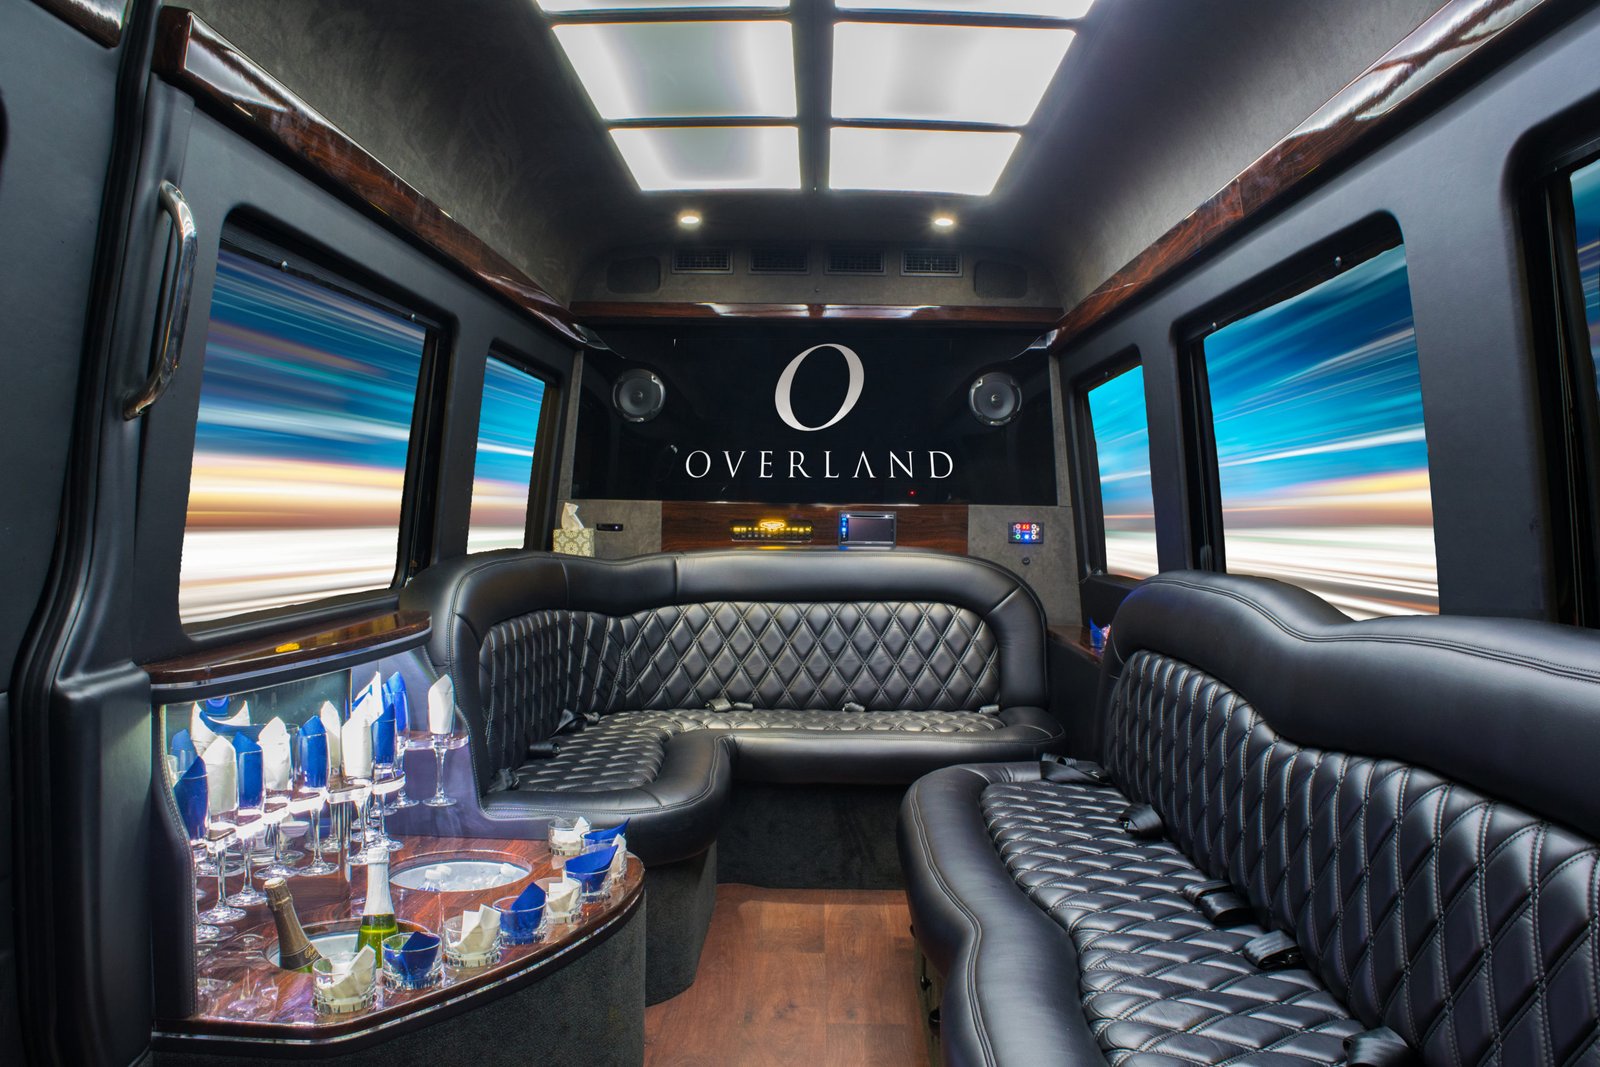 How Much Does It Cost to Ride Around in a Limo?